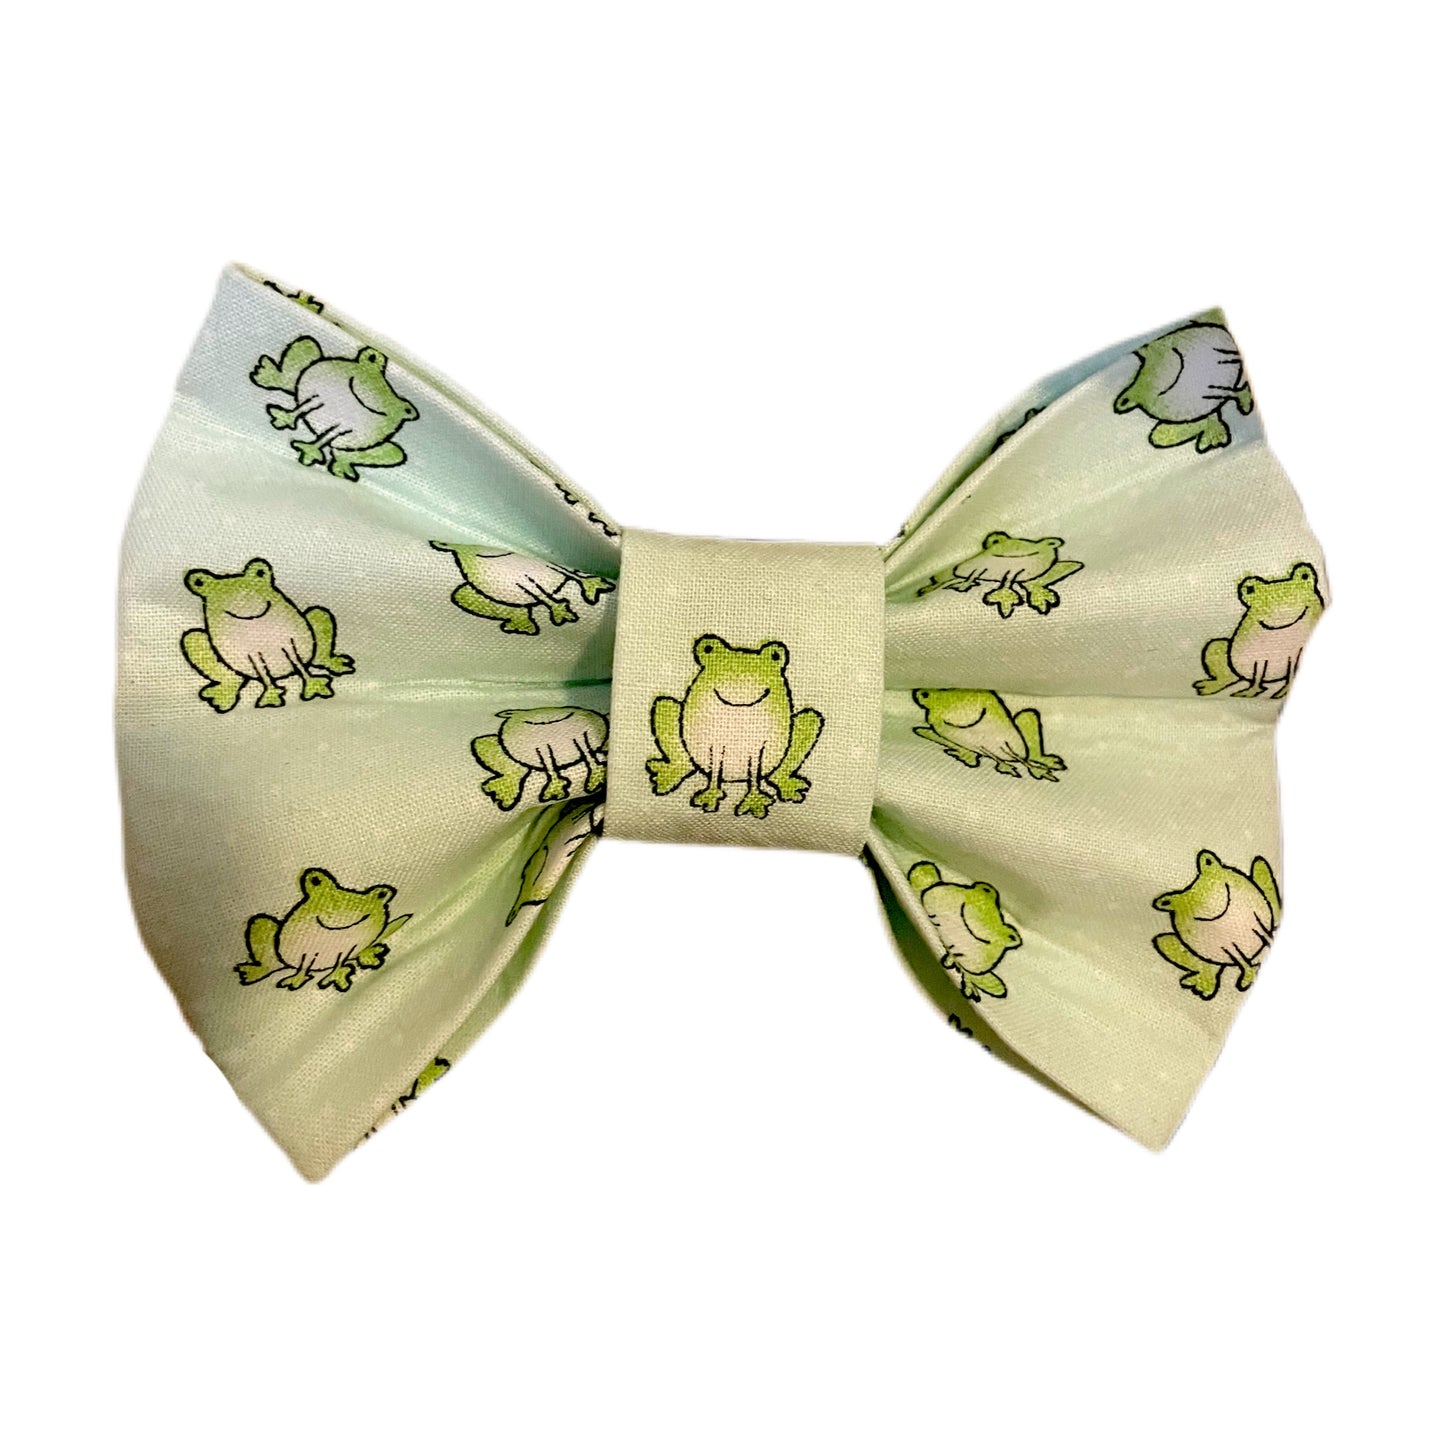 Frogger Bow Tie (Size Large)